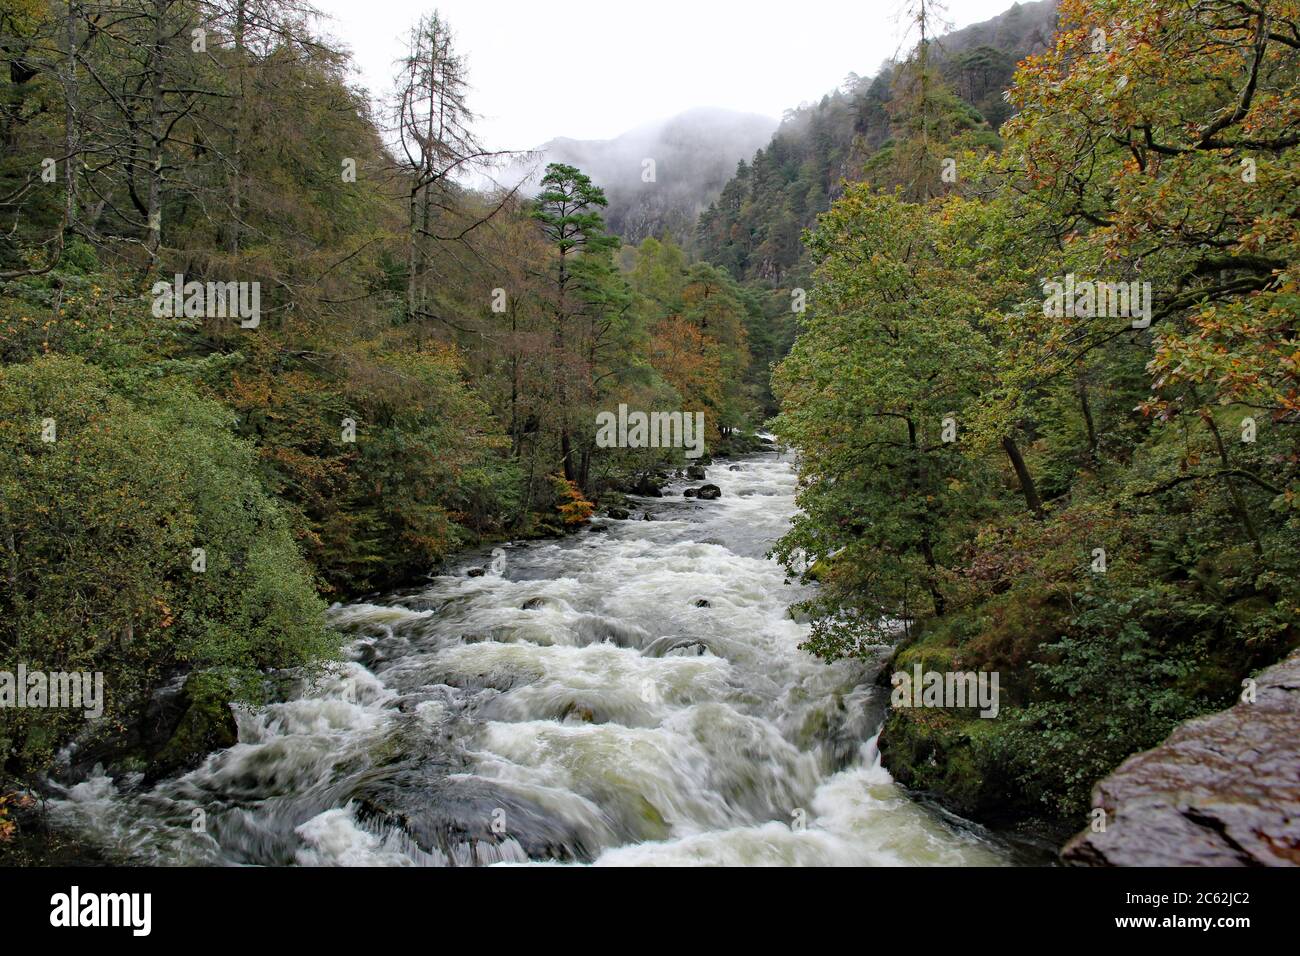 The Afon Glaslyn river in Snowdonia Mountain Range near to Beddgelert, North Wales, in full flow on a wet, windy, and wild Autumn day with pouring rai Stock Photo